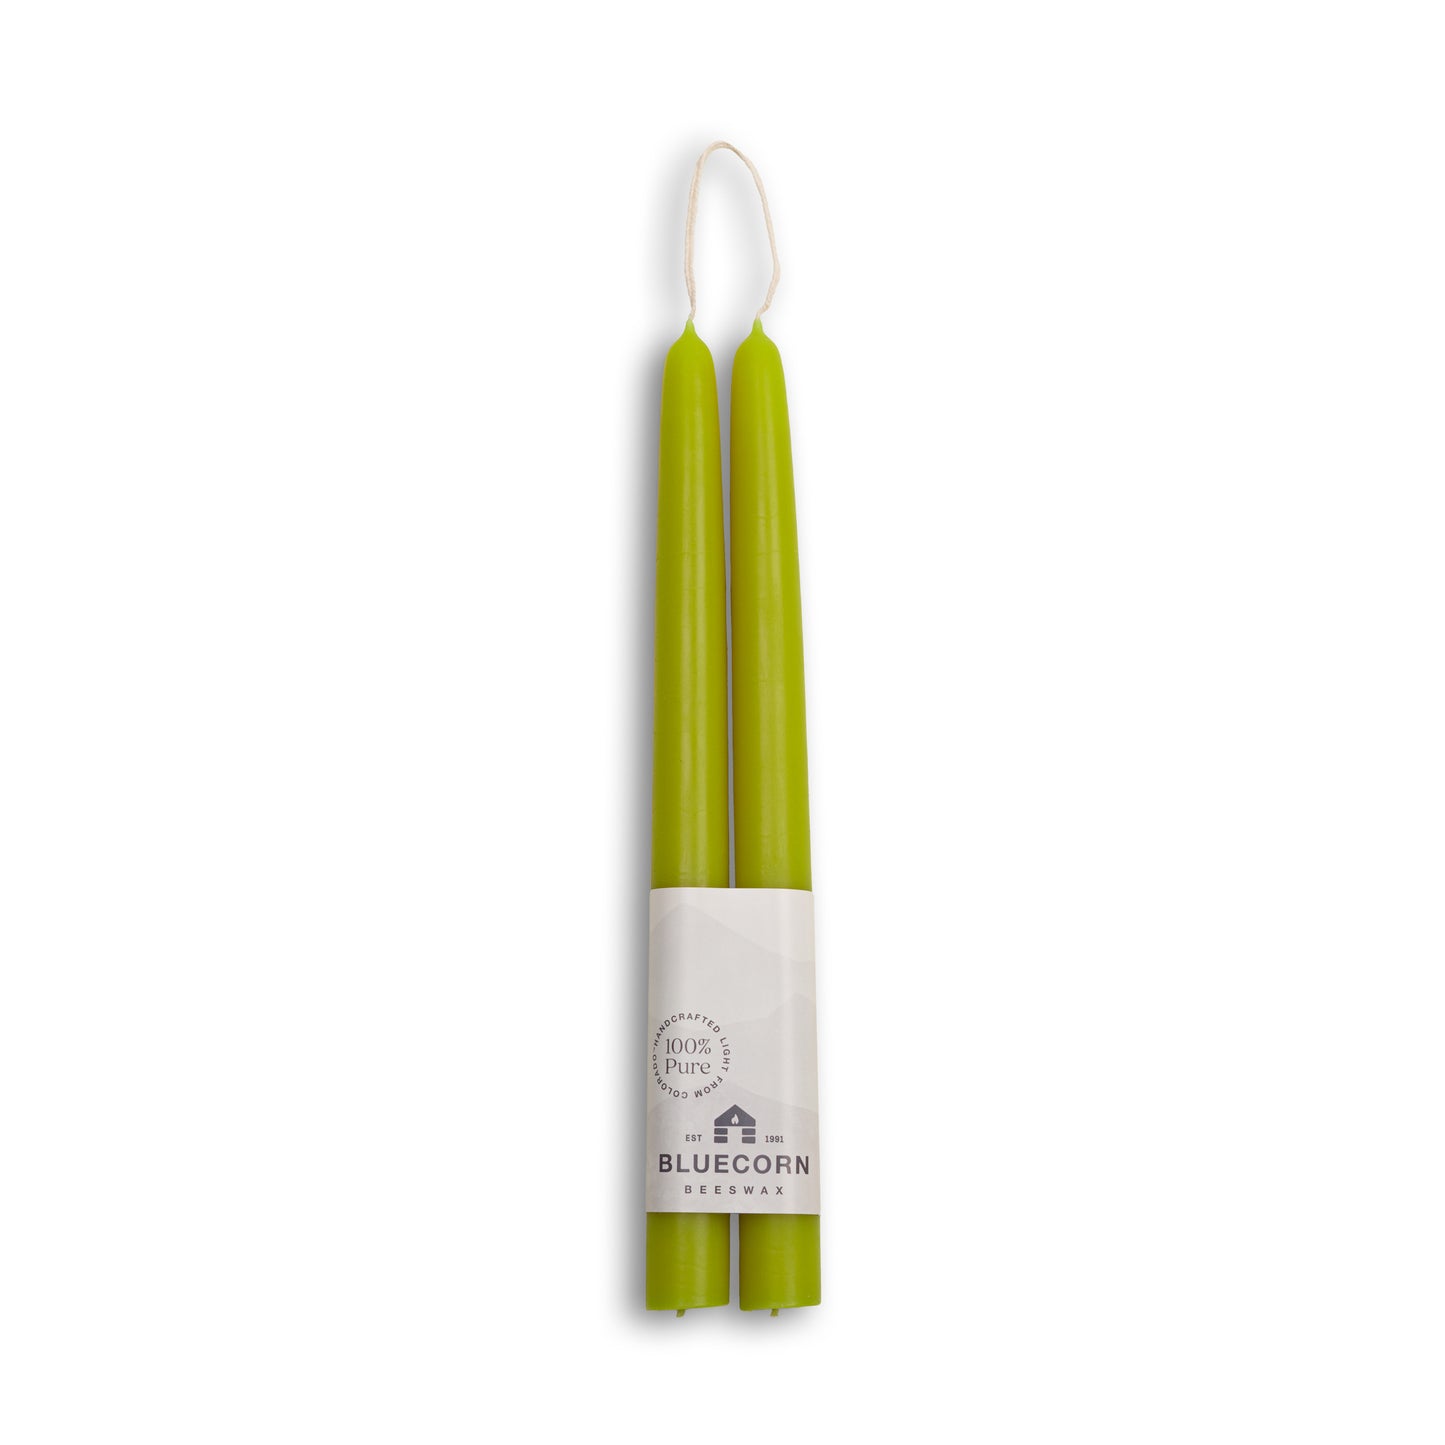 Bluecorn Candles pistachio green beeswax taper candles